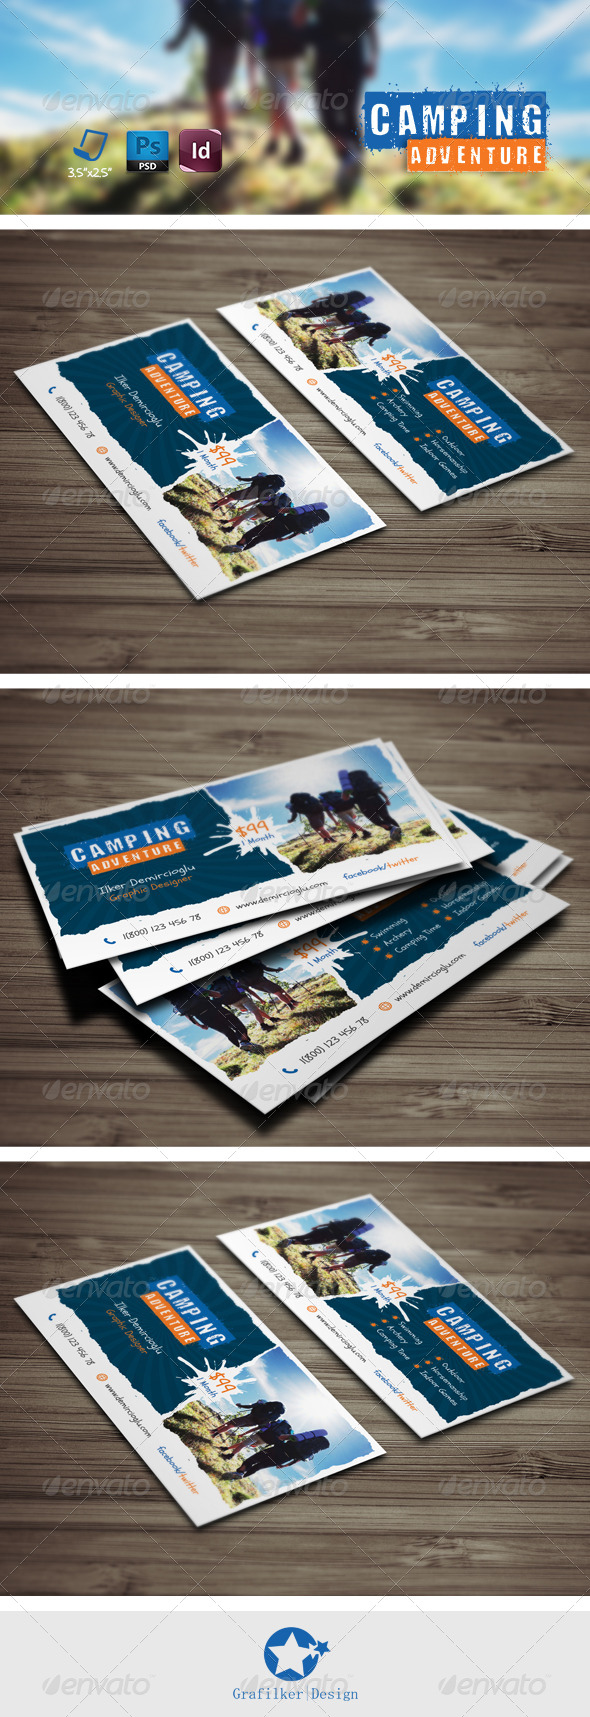 Camping Adventure Business Card Templates (Business Cards)